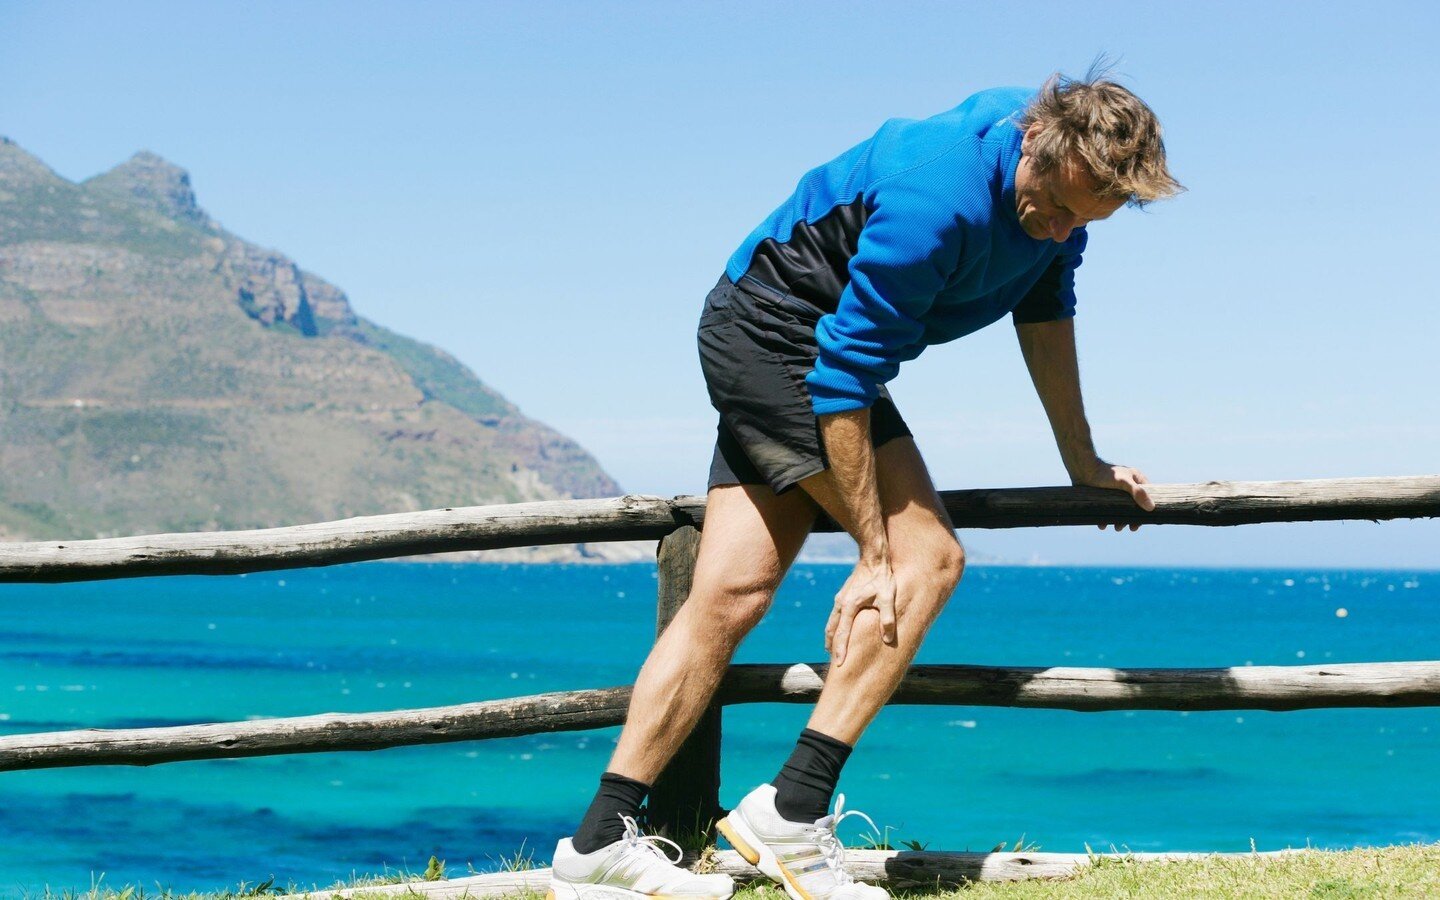 You may not give them much thought, but your calf muscles are constantly working hard day-to-day when you&rsquo;re walking around or exercising. This makes it really inconvenient - not to mention painful - when you strain a calf muscle. Muscle strain